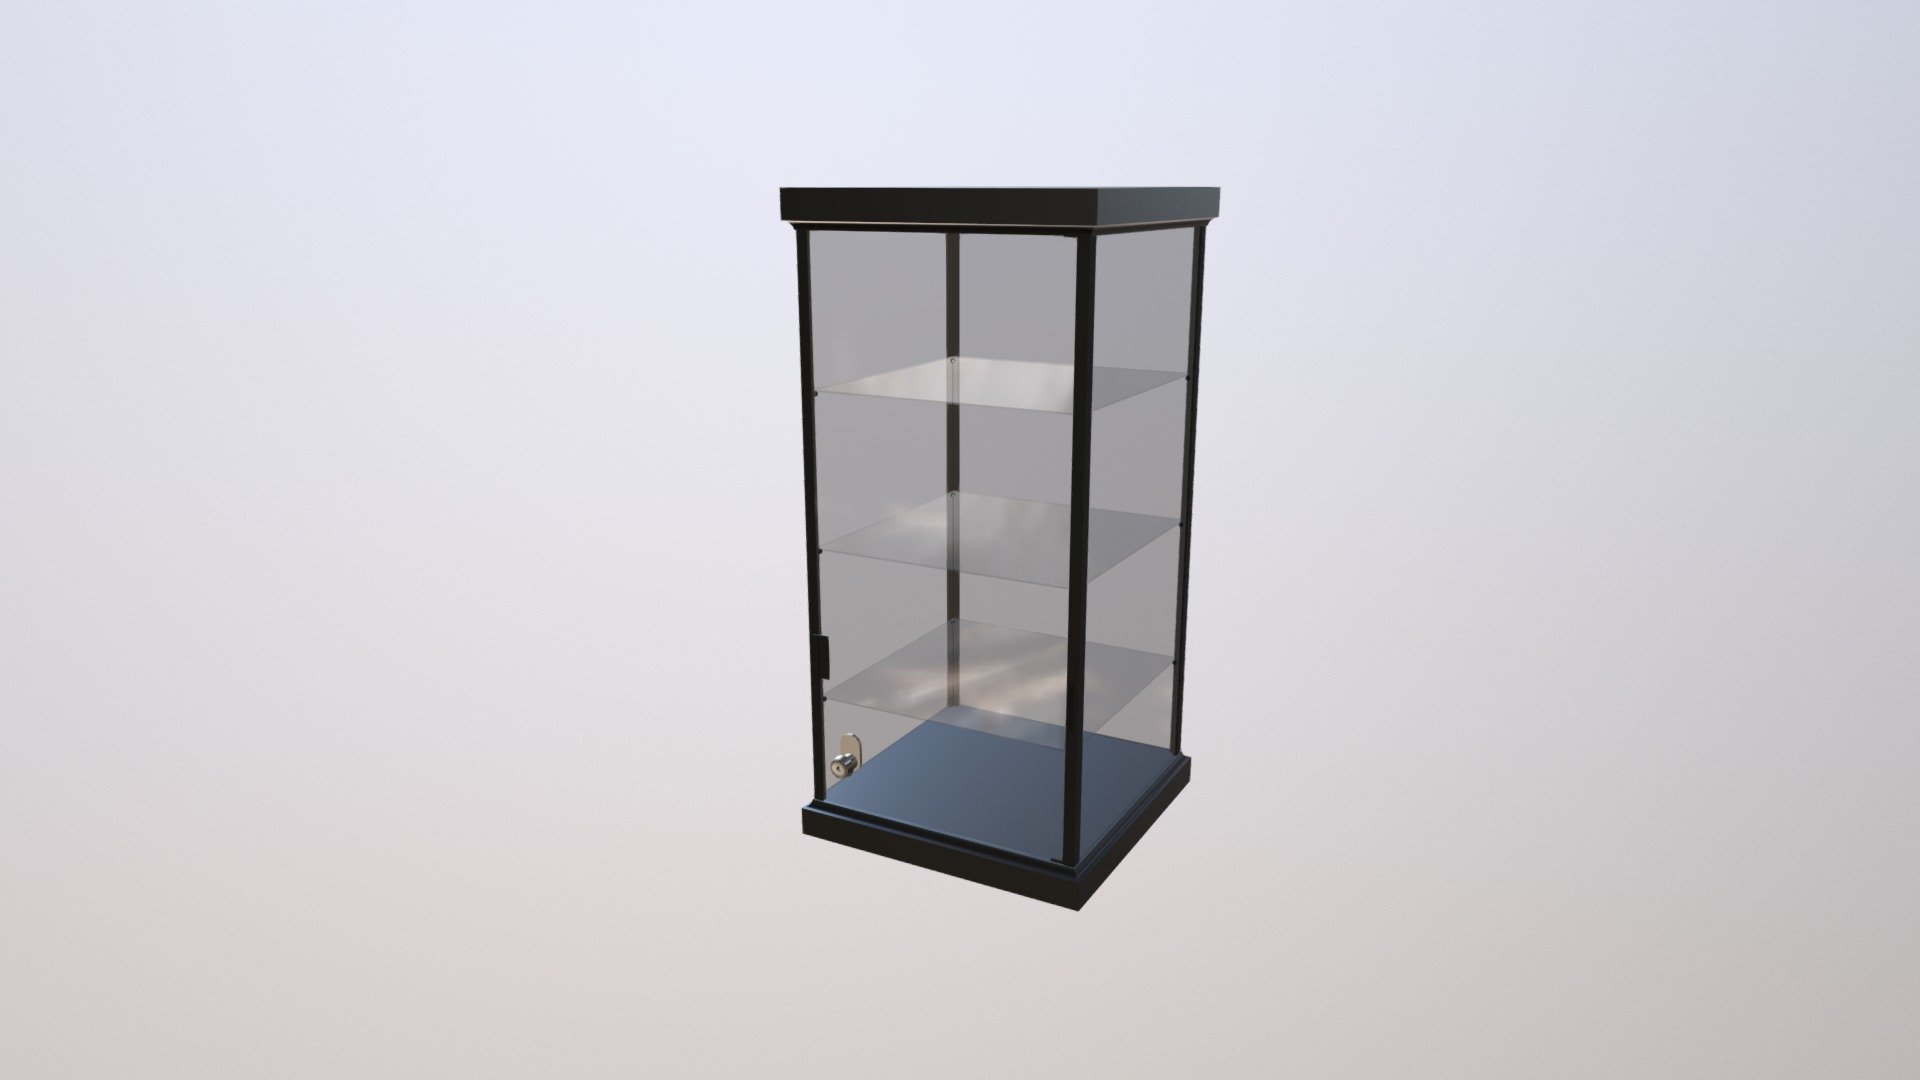 Glass Cabinet that was inspired by a glass cabinet that I own and re-created using Blender. This model set uses PBR textures and was made using the metalness workflow. Included with the model are several different textures for customization. Also included is a texture of the UVLayout for the model so that you can easily see how each part of the model is divided.

This is a glass cabinet that makes use of the alpha channel on its diffuse map to create transparency for the glass walls, doors and shelves. There is also a diffuse map that does not use the alpha channel and a separate opacity map. It has a lock on the front glass door which uses a metallic map to make it metal. There are also rubber stops on the front glass door located on either side. Each shelf rests on 4 rubber pegs that stick out from each corner of the cabinet.

Features:


Uses metalness workflow
Uses PBR textures
Includes 8 2048x2048 PNG textures
Model is exported into 4 file formats (FBX, OBJ, 3DS, DAE/Collada)
 - Glass Cabinet - Buy Royalty Free 3D model by Pickle55100 3d model